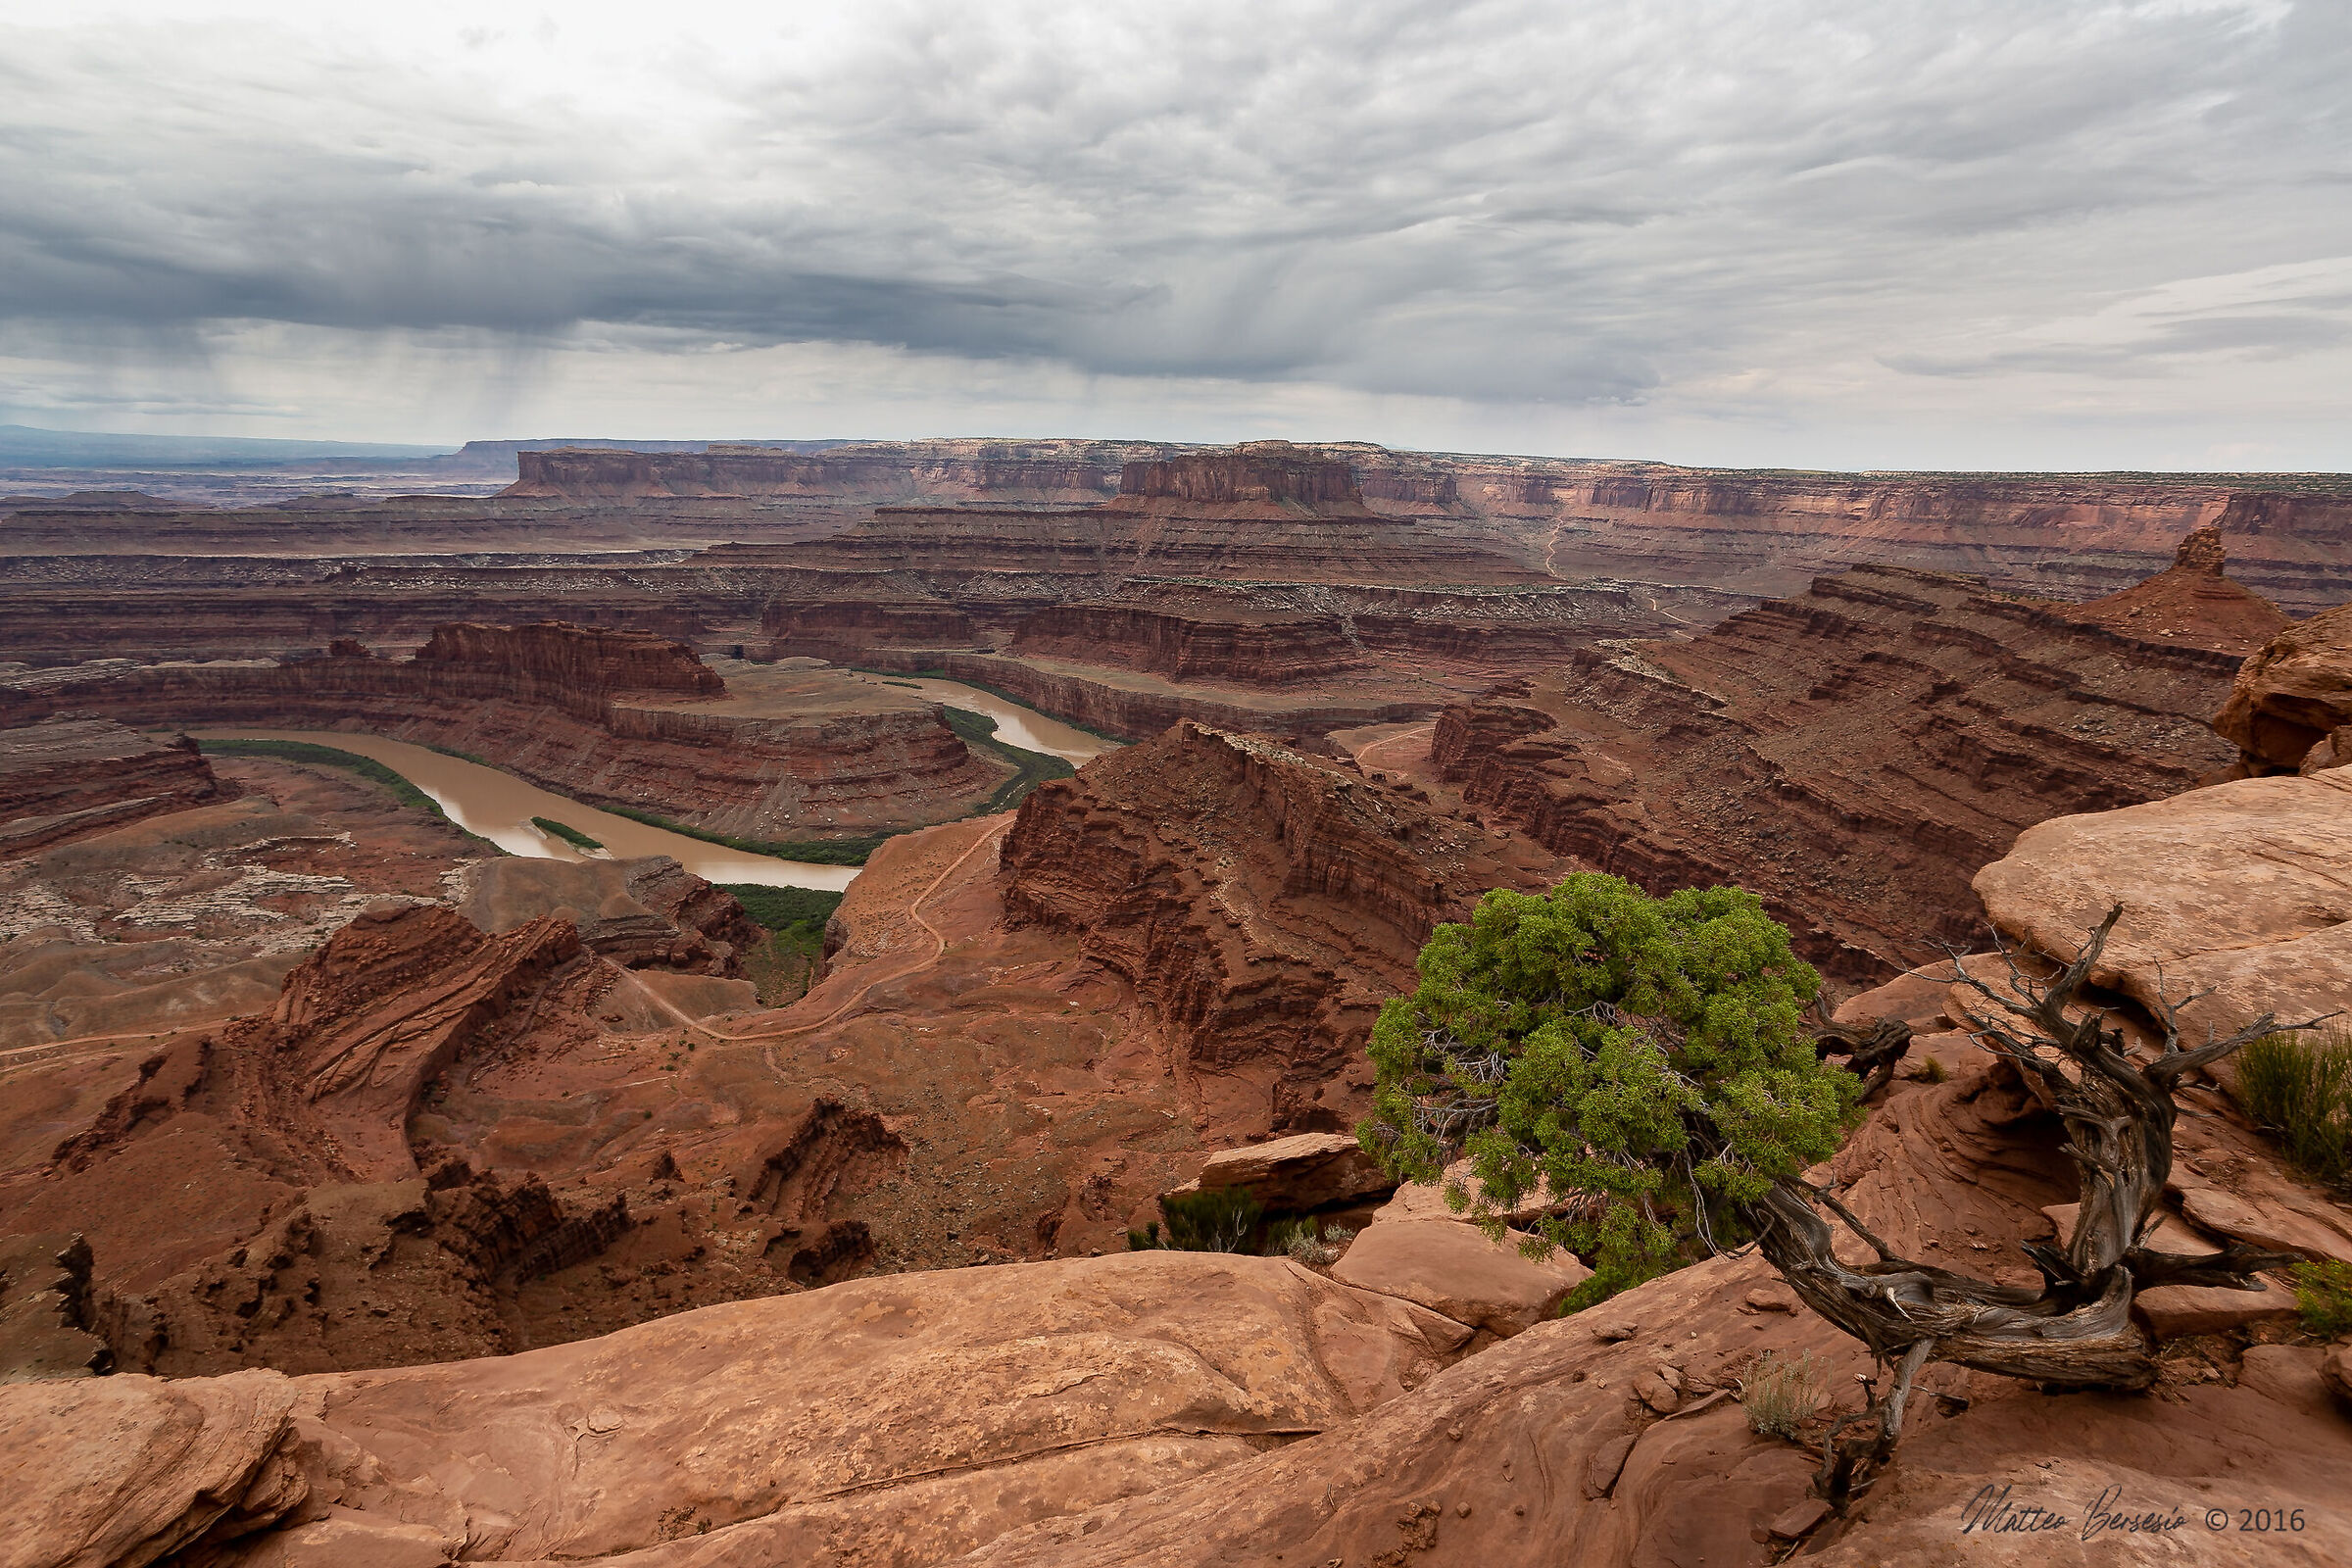 Storm approaches Dead Horse Point...